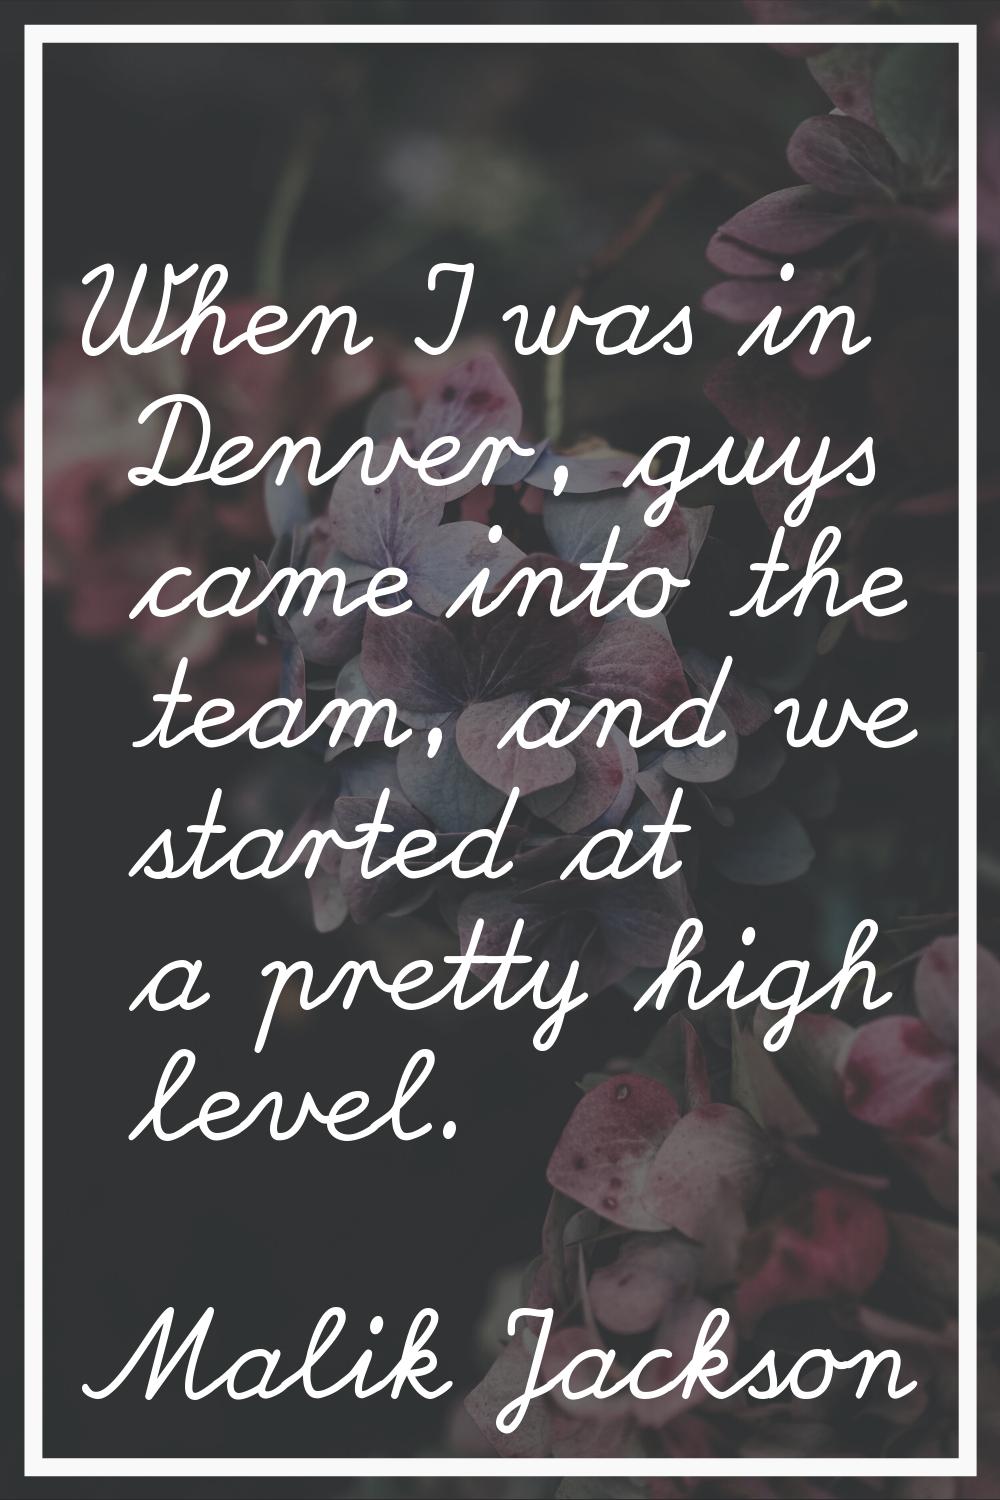 When I was in Denver, guys came into the team, and we started at a pretty high level.